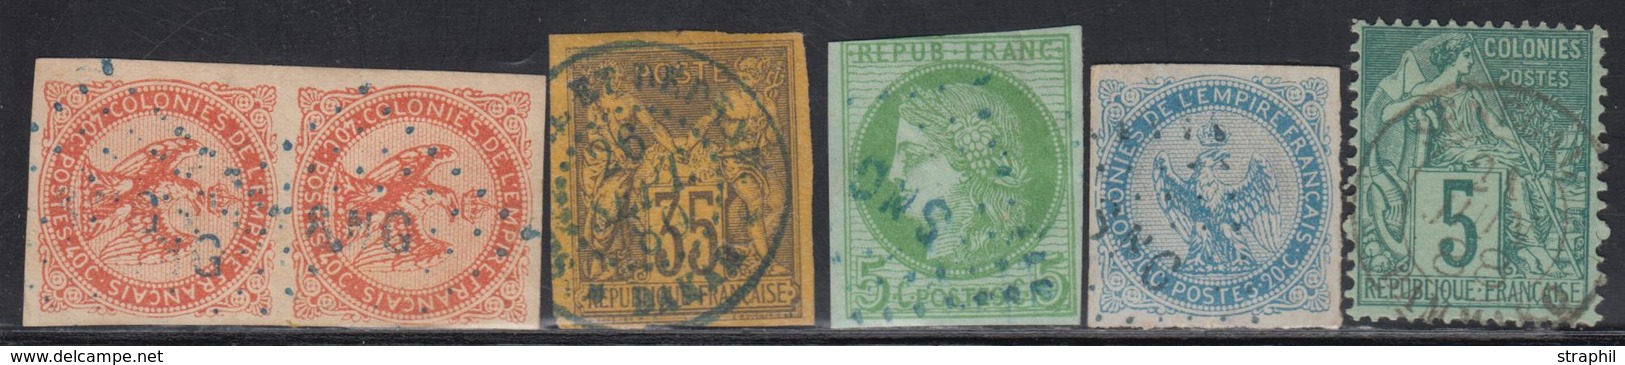 O N°4, 5 Paire, 17 Obl. "SNG", 45, 49 Obl. Càd SENEGAL - TB - Eagle And Crown